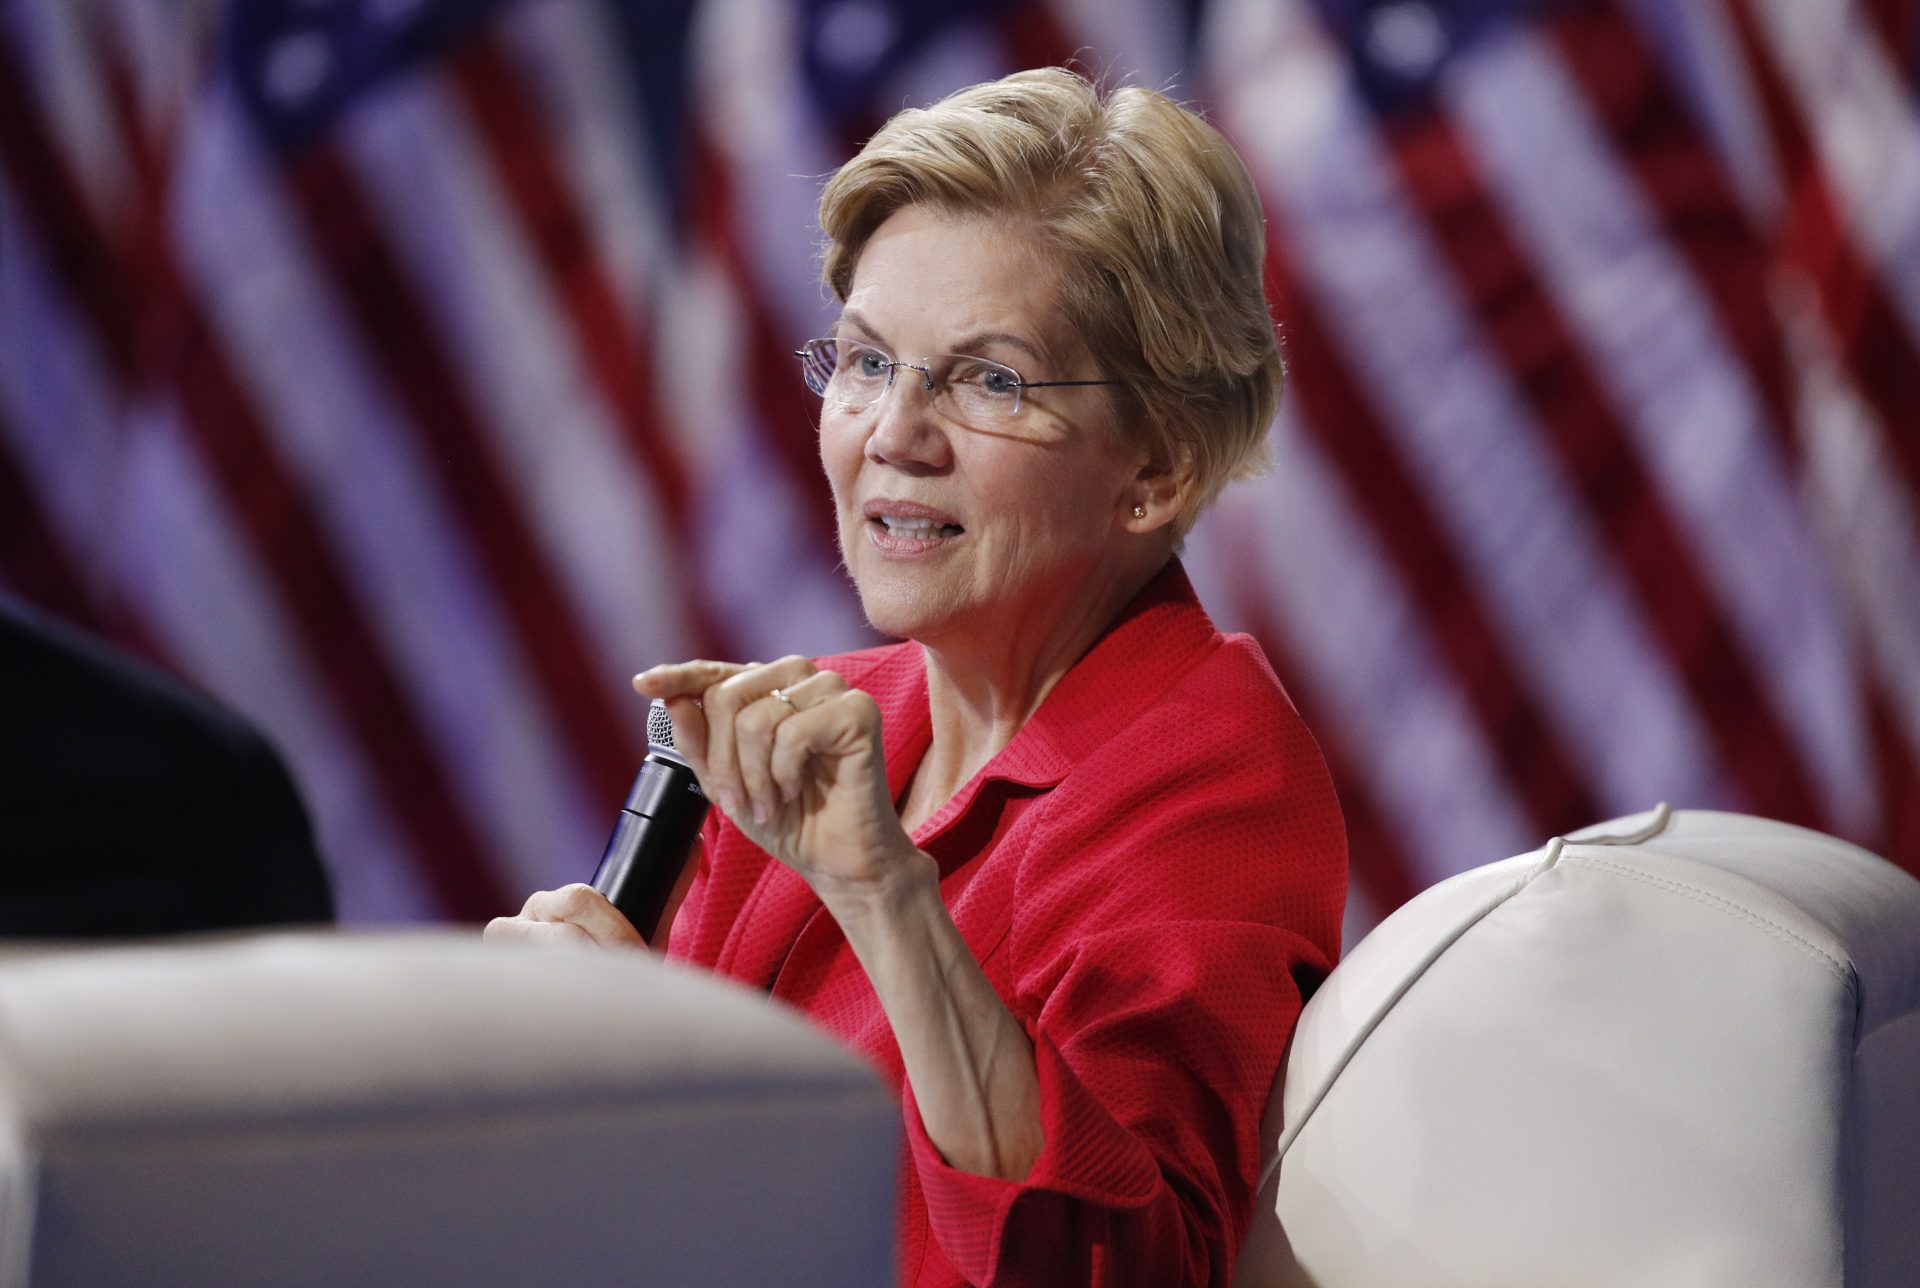 Democratic presidential candidate Sen. Elizabeth Warren, D-Mass., speaks during a gun safety forum in Las Vegas on Oct. 2, 2019. Bernie Sanders and Elizabeth Warren raked in more cash over the past three months than any of their Democratic rivals.